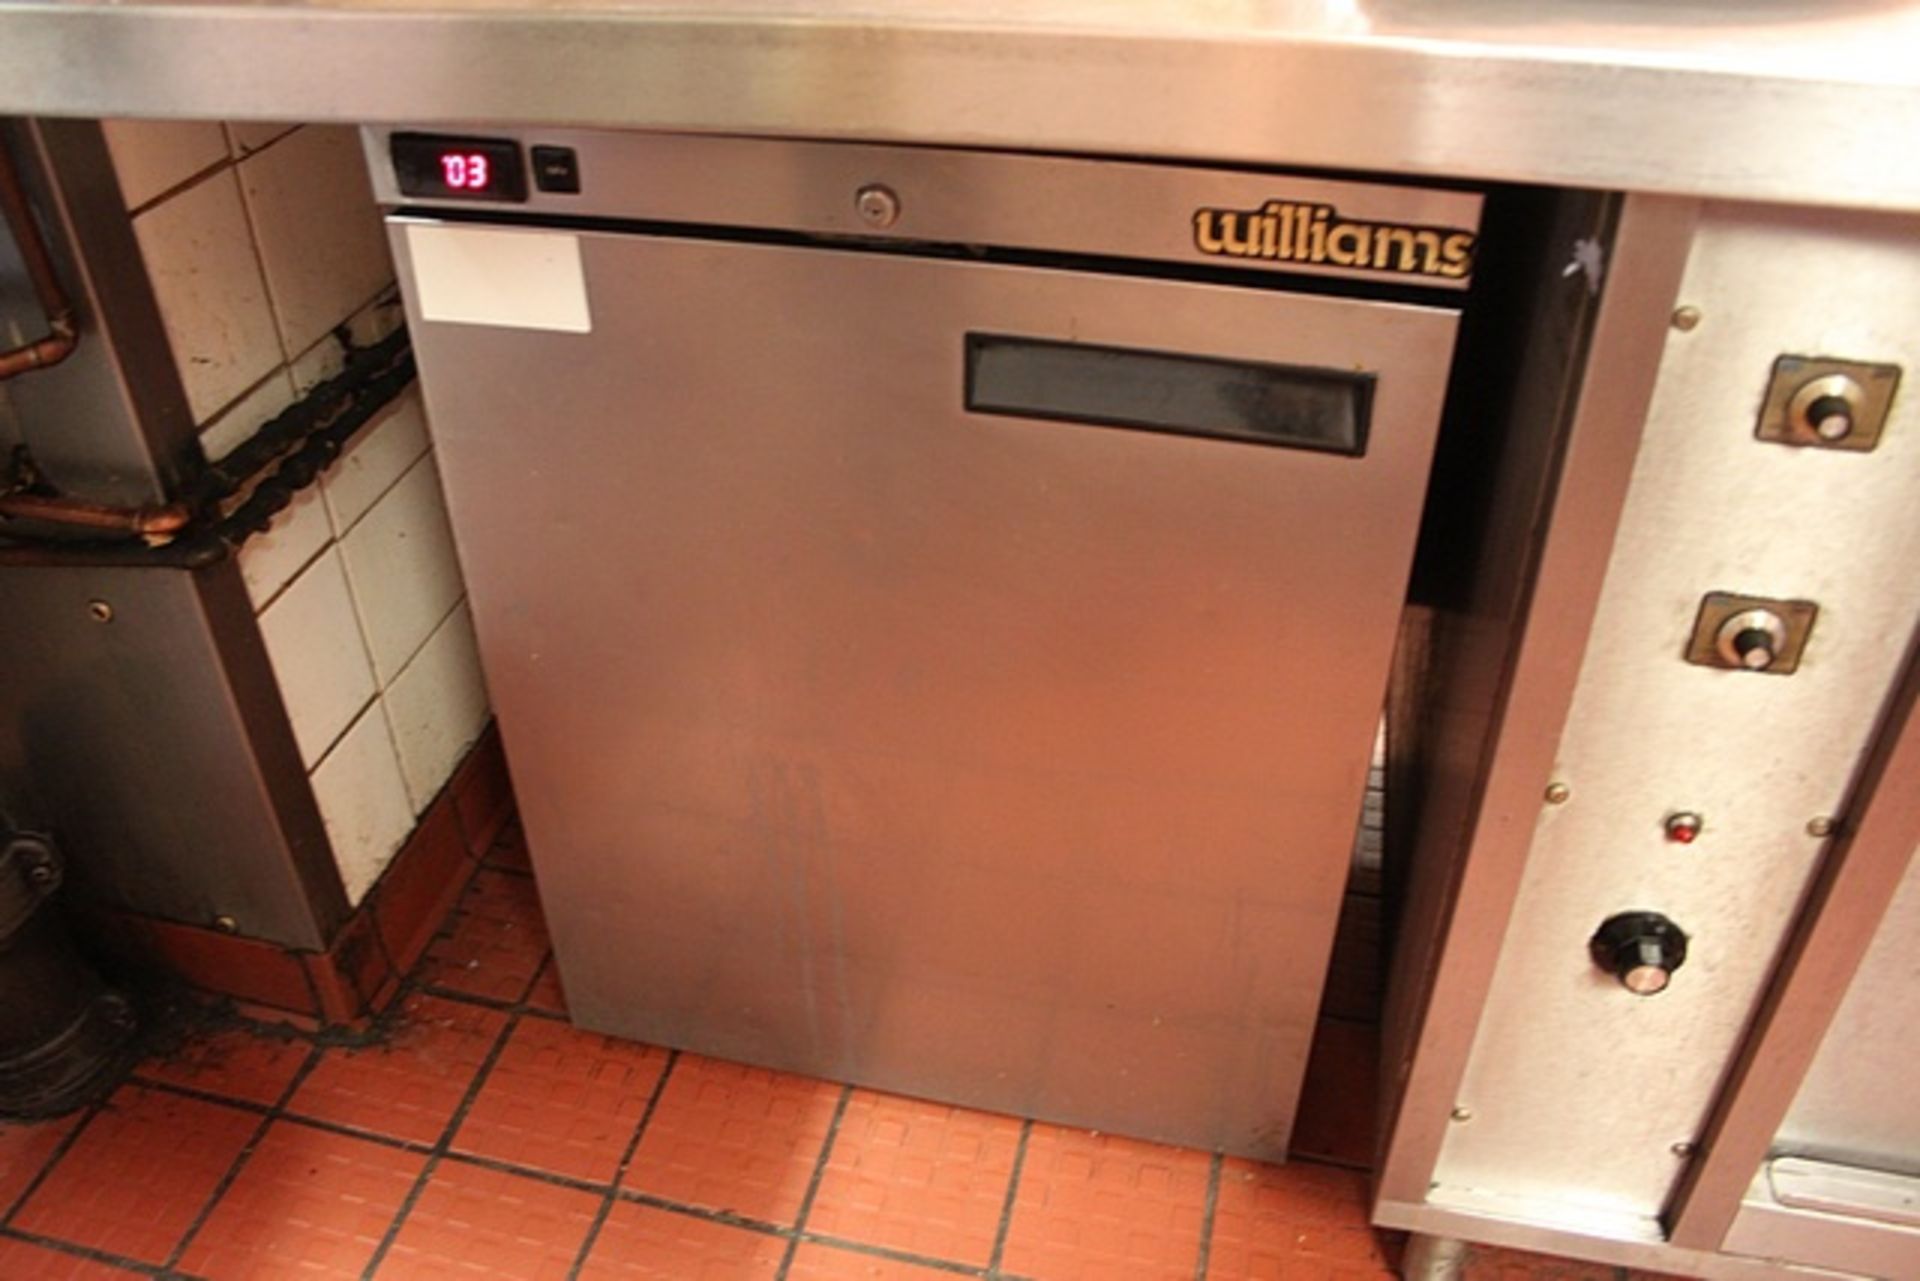 Williams HP55C SS stainless steel undercounter refrigerator temperature range 1°C to 4°C 600mm x